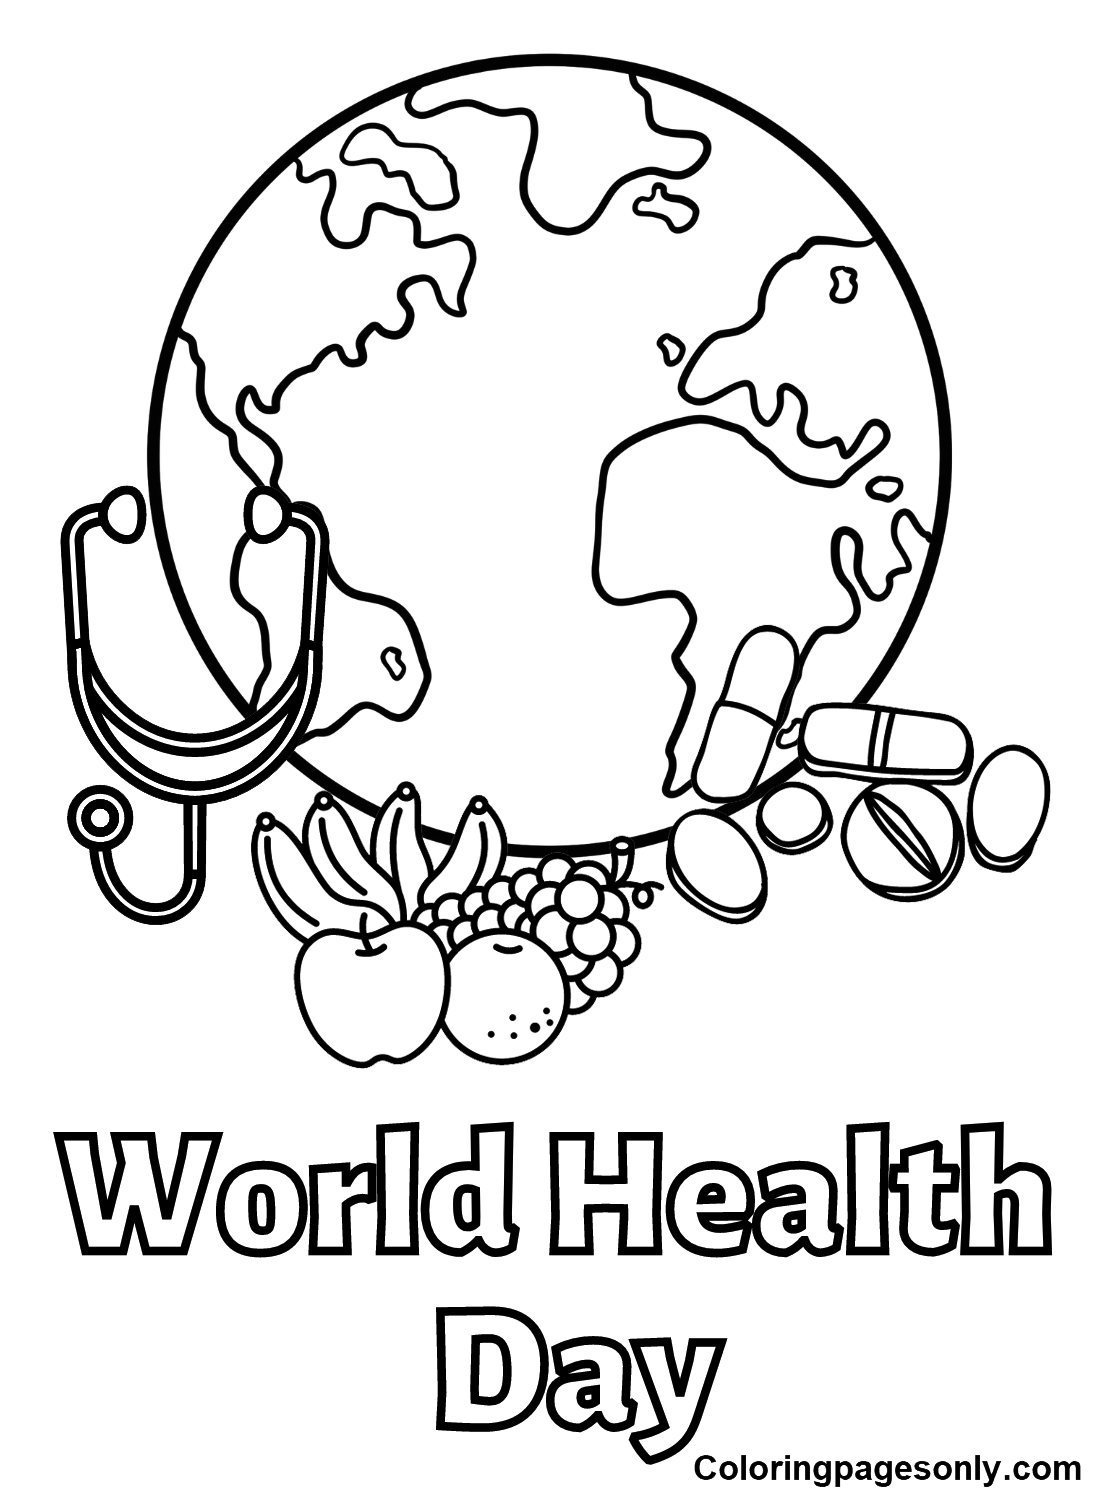 World Health Day Pictures Coloring Page